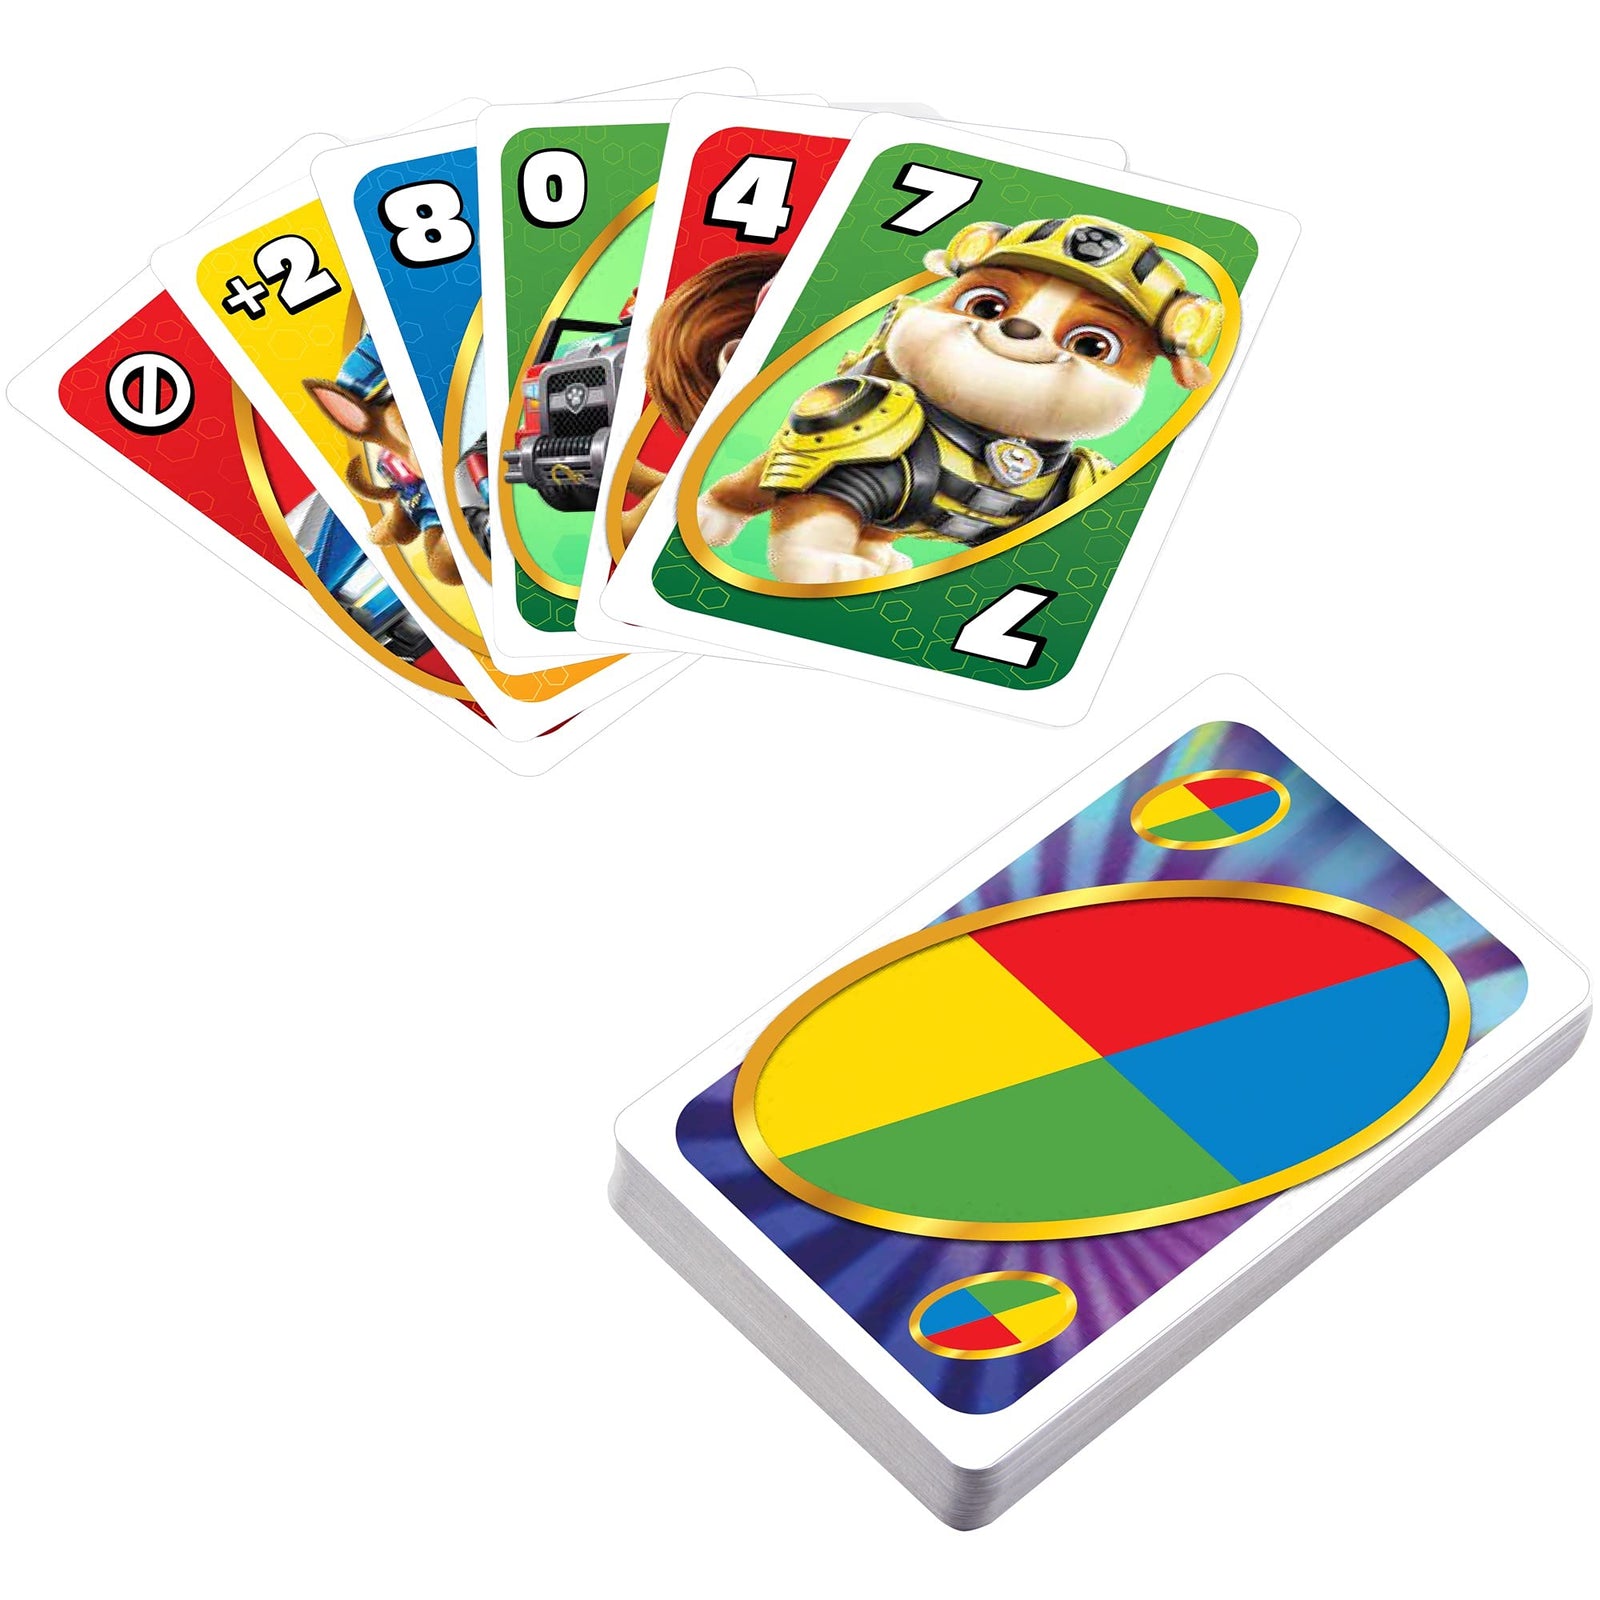 UNO Junior PAW Patrol Card Game with 56 Cards 2-4 Players, Gift for Kids 3 Years Old & Up,Multicolor,HGD13